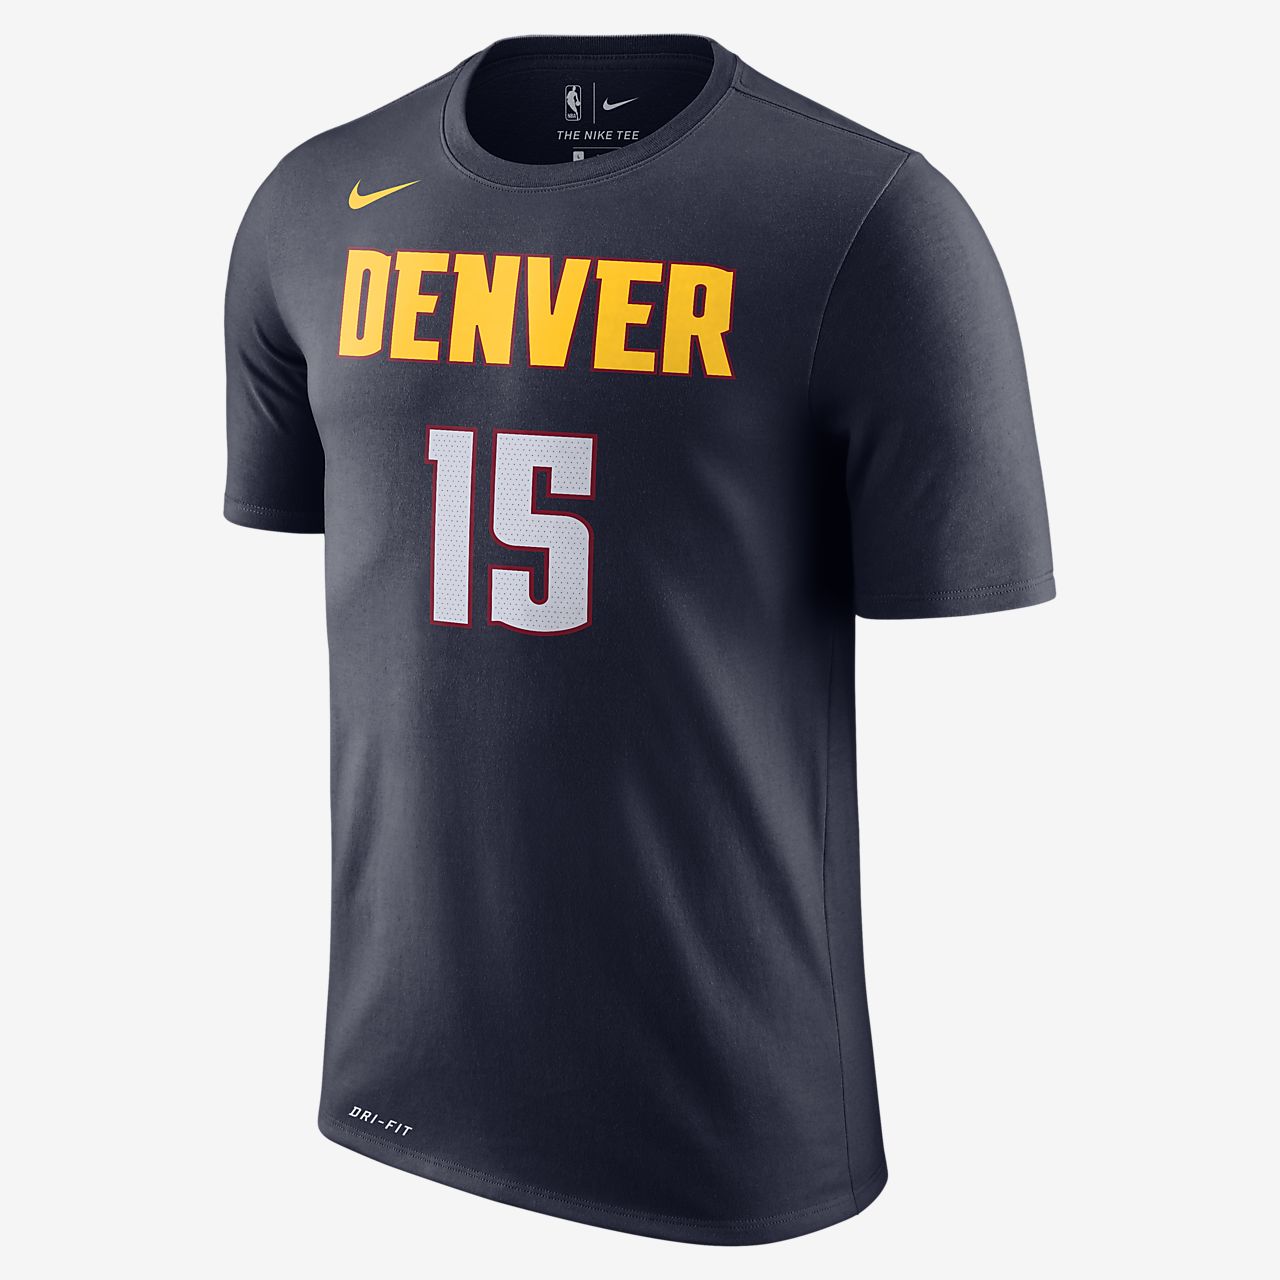 new nuggets jerseys for sale